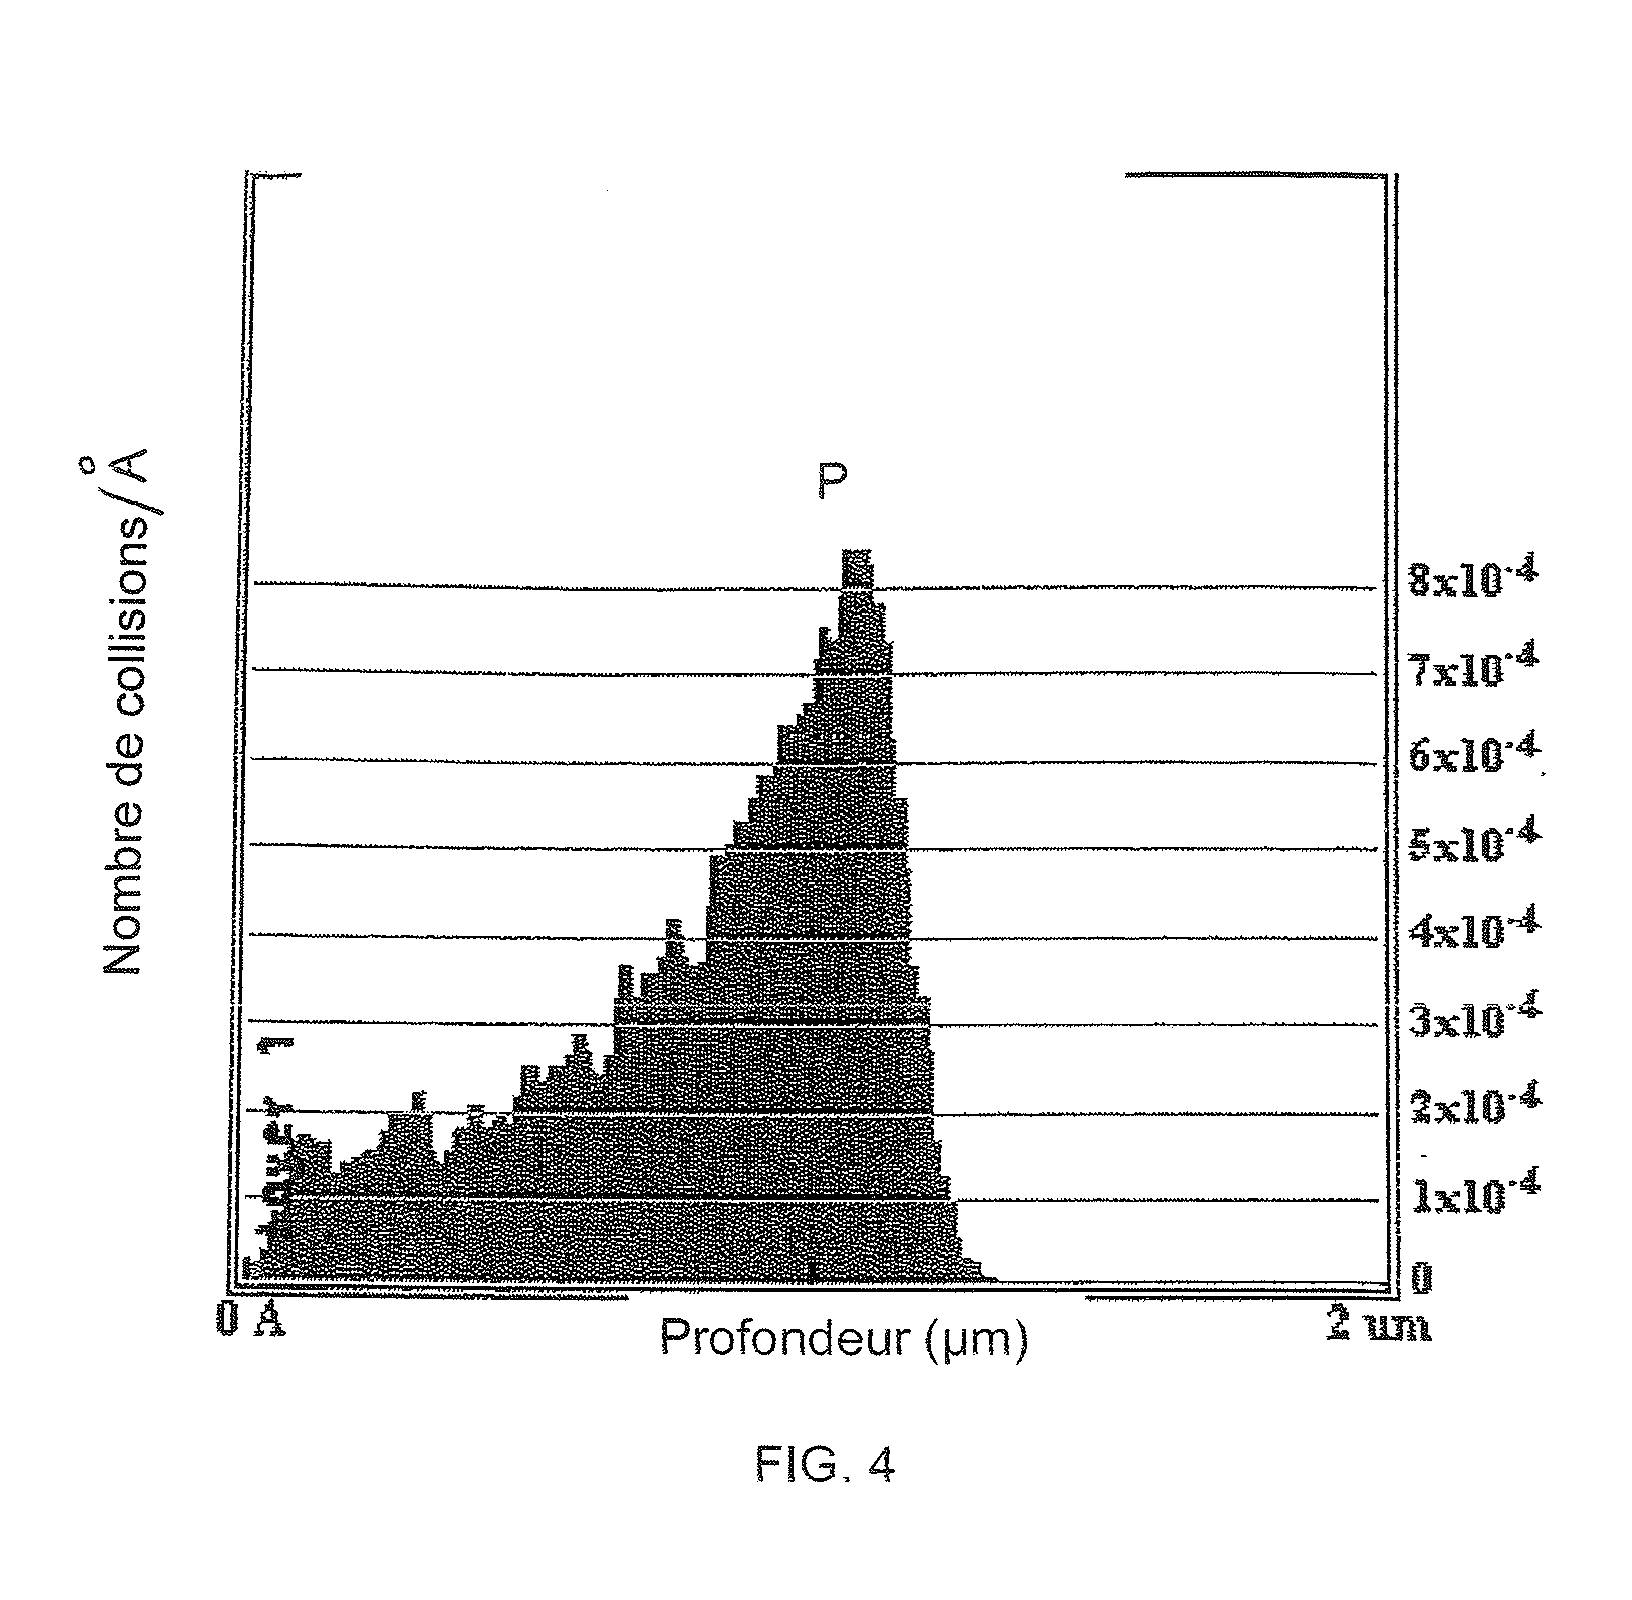 Method for preparing a substrate by implantation and irradiation